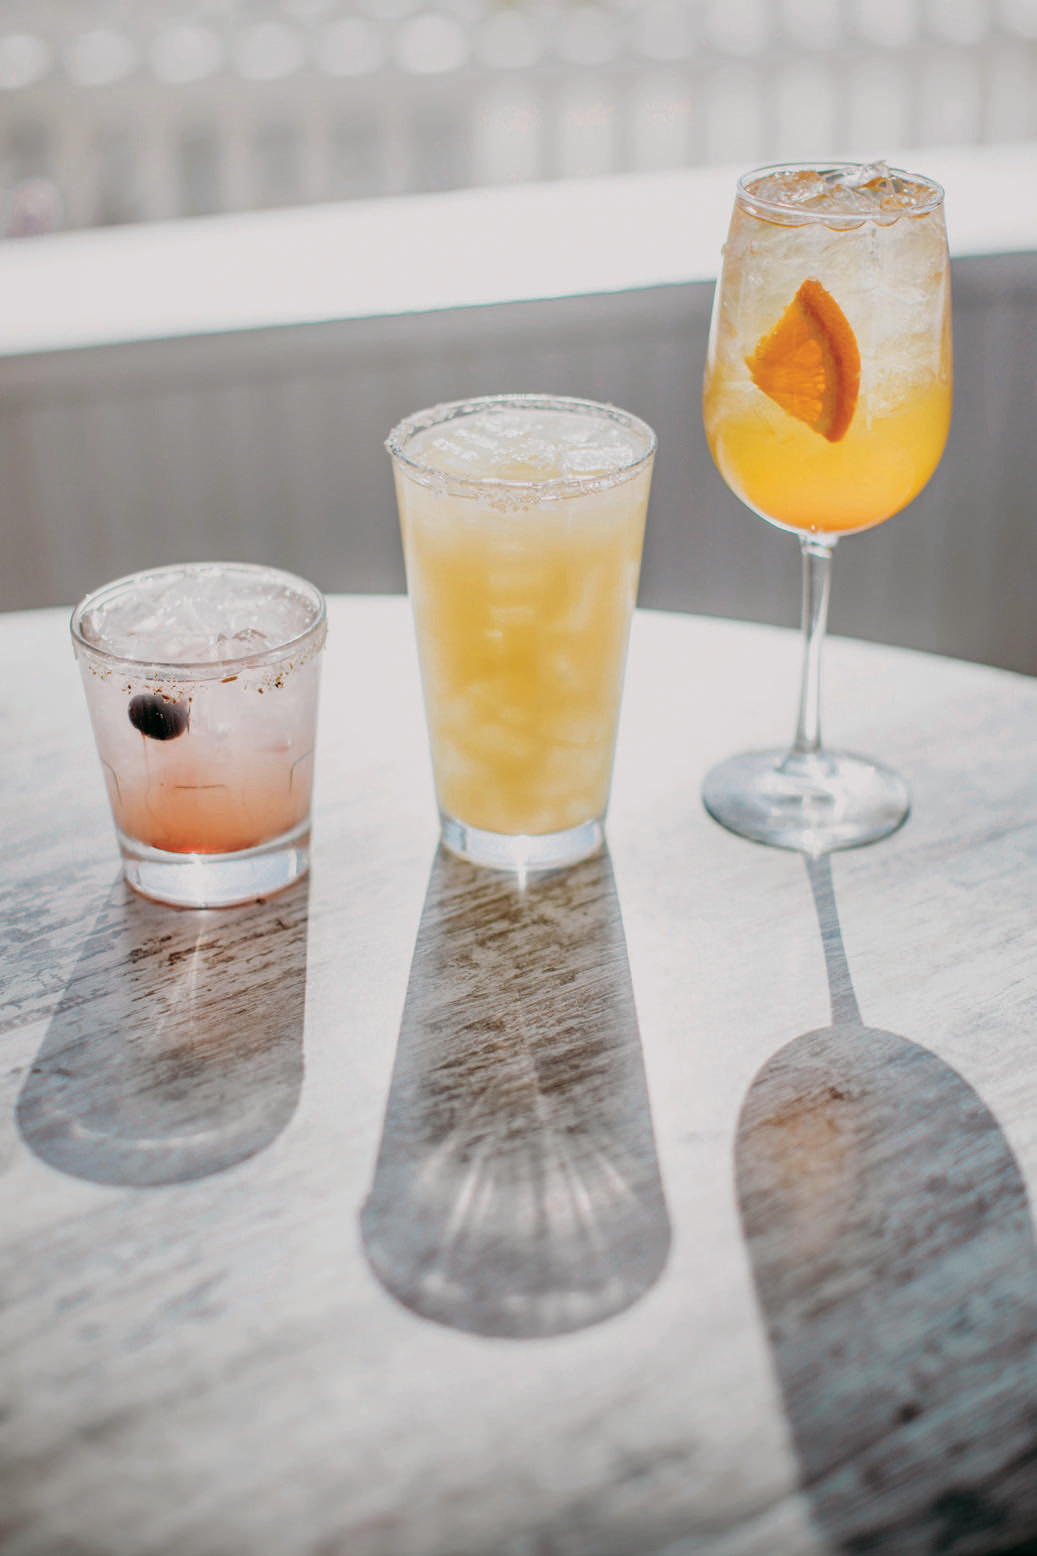 Thirsty? These refreshingly sweet dessert cocktails from Sazio in Rehoboth Beach pair delightfully with their Italian cuisine and the summer sun.